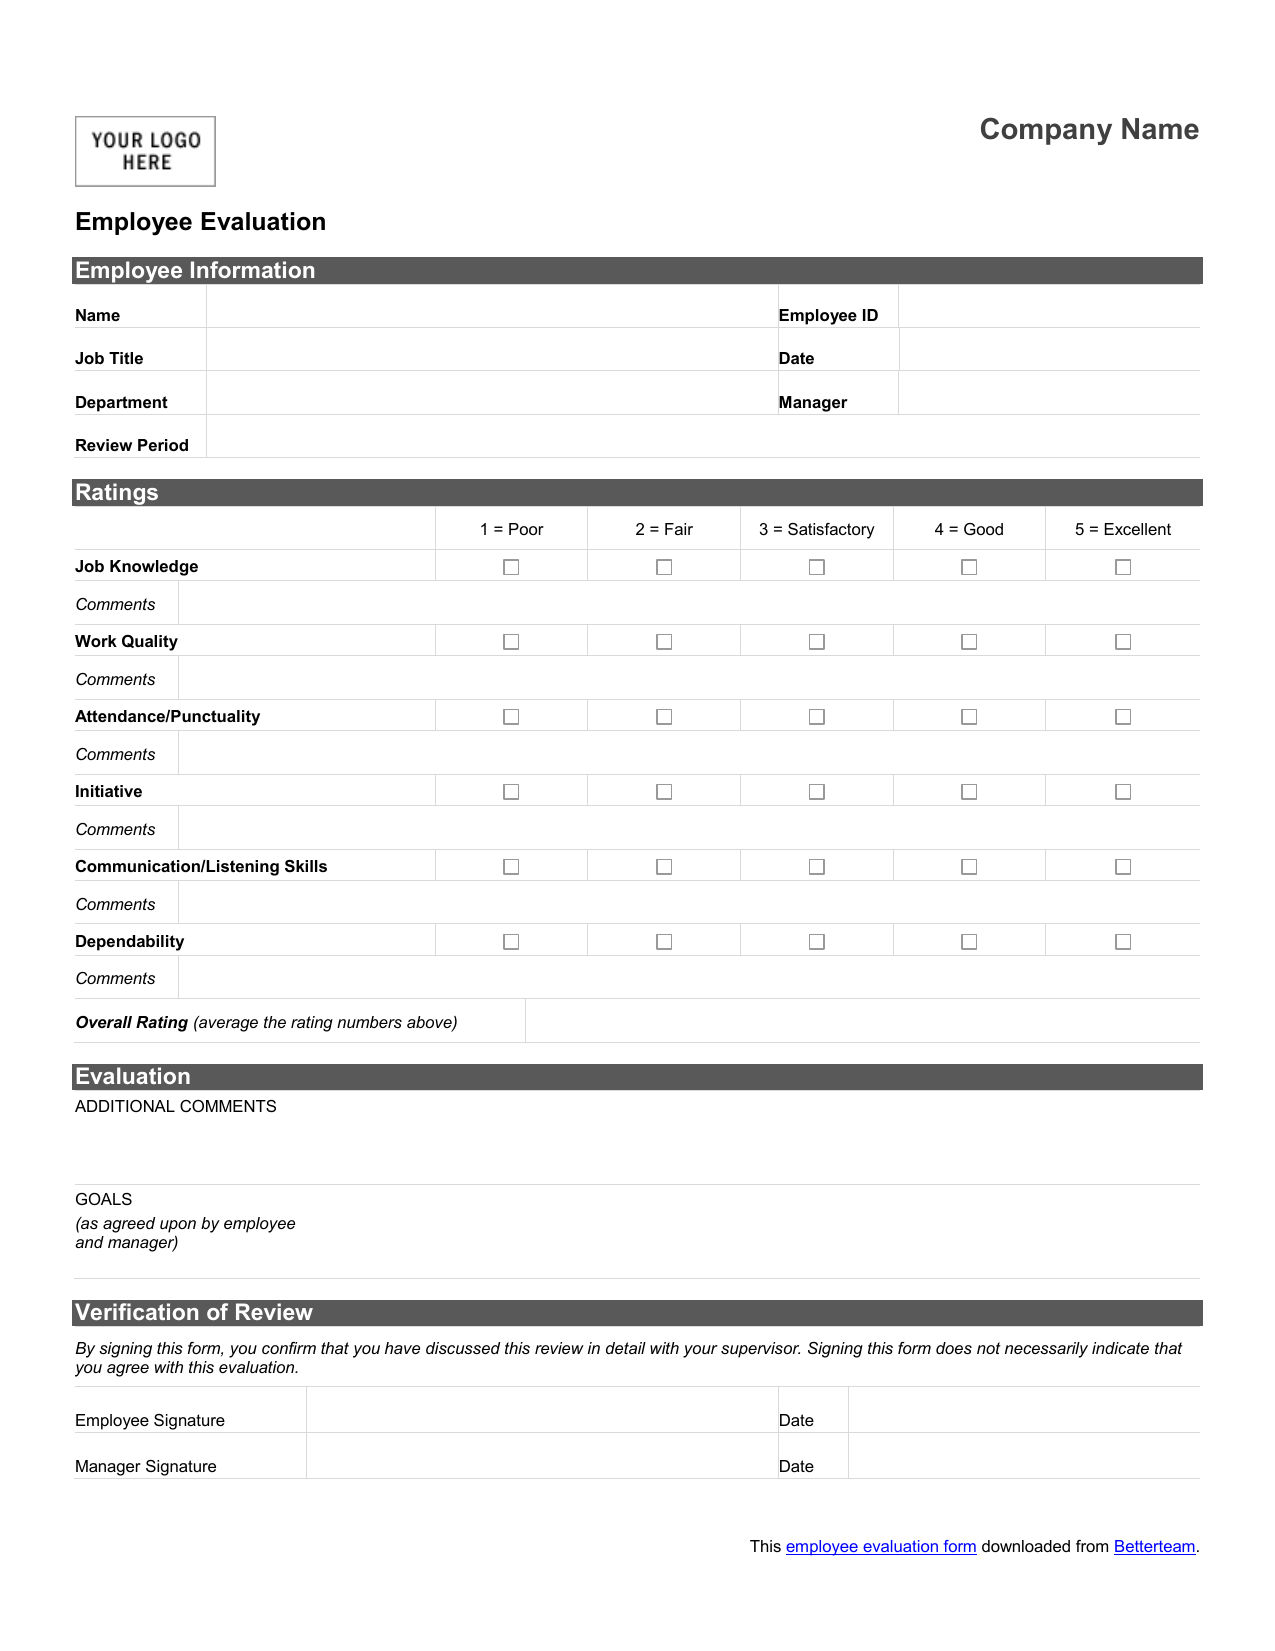 Download Employee Evaluation Form For Free Page Formtemplate Images And Photos Finder